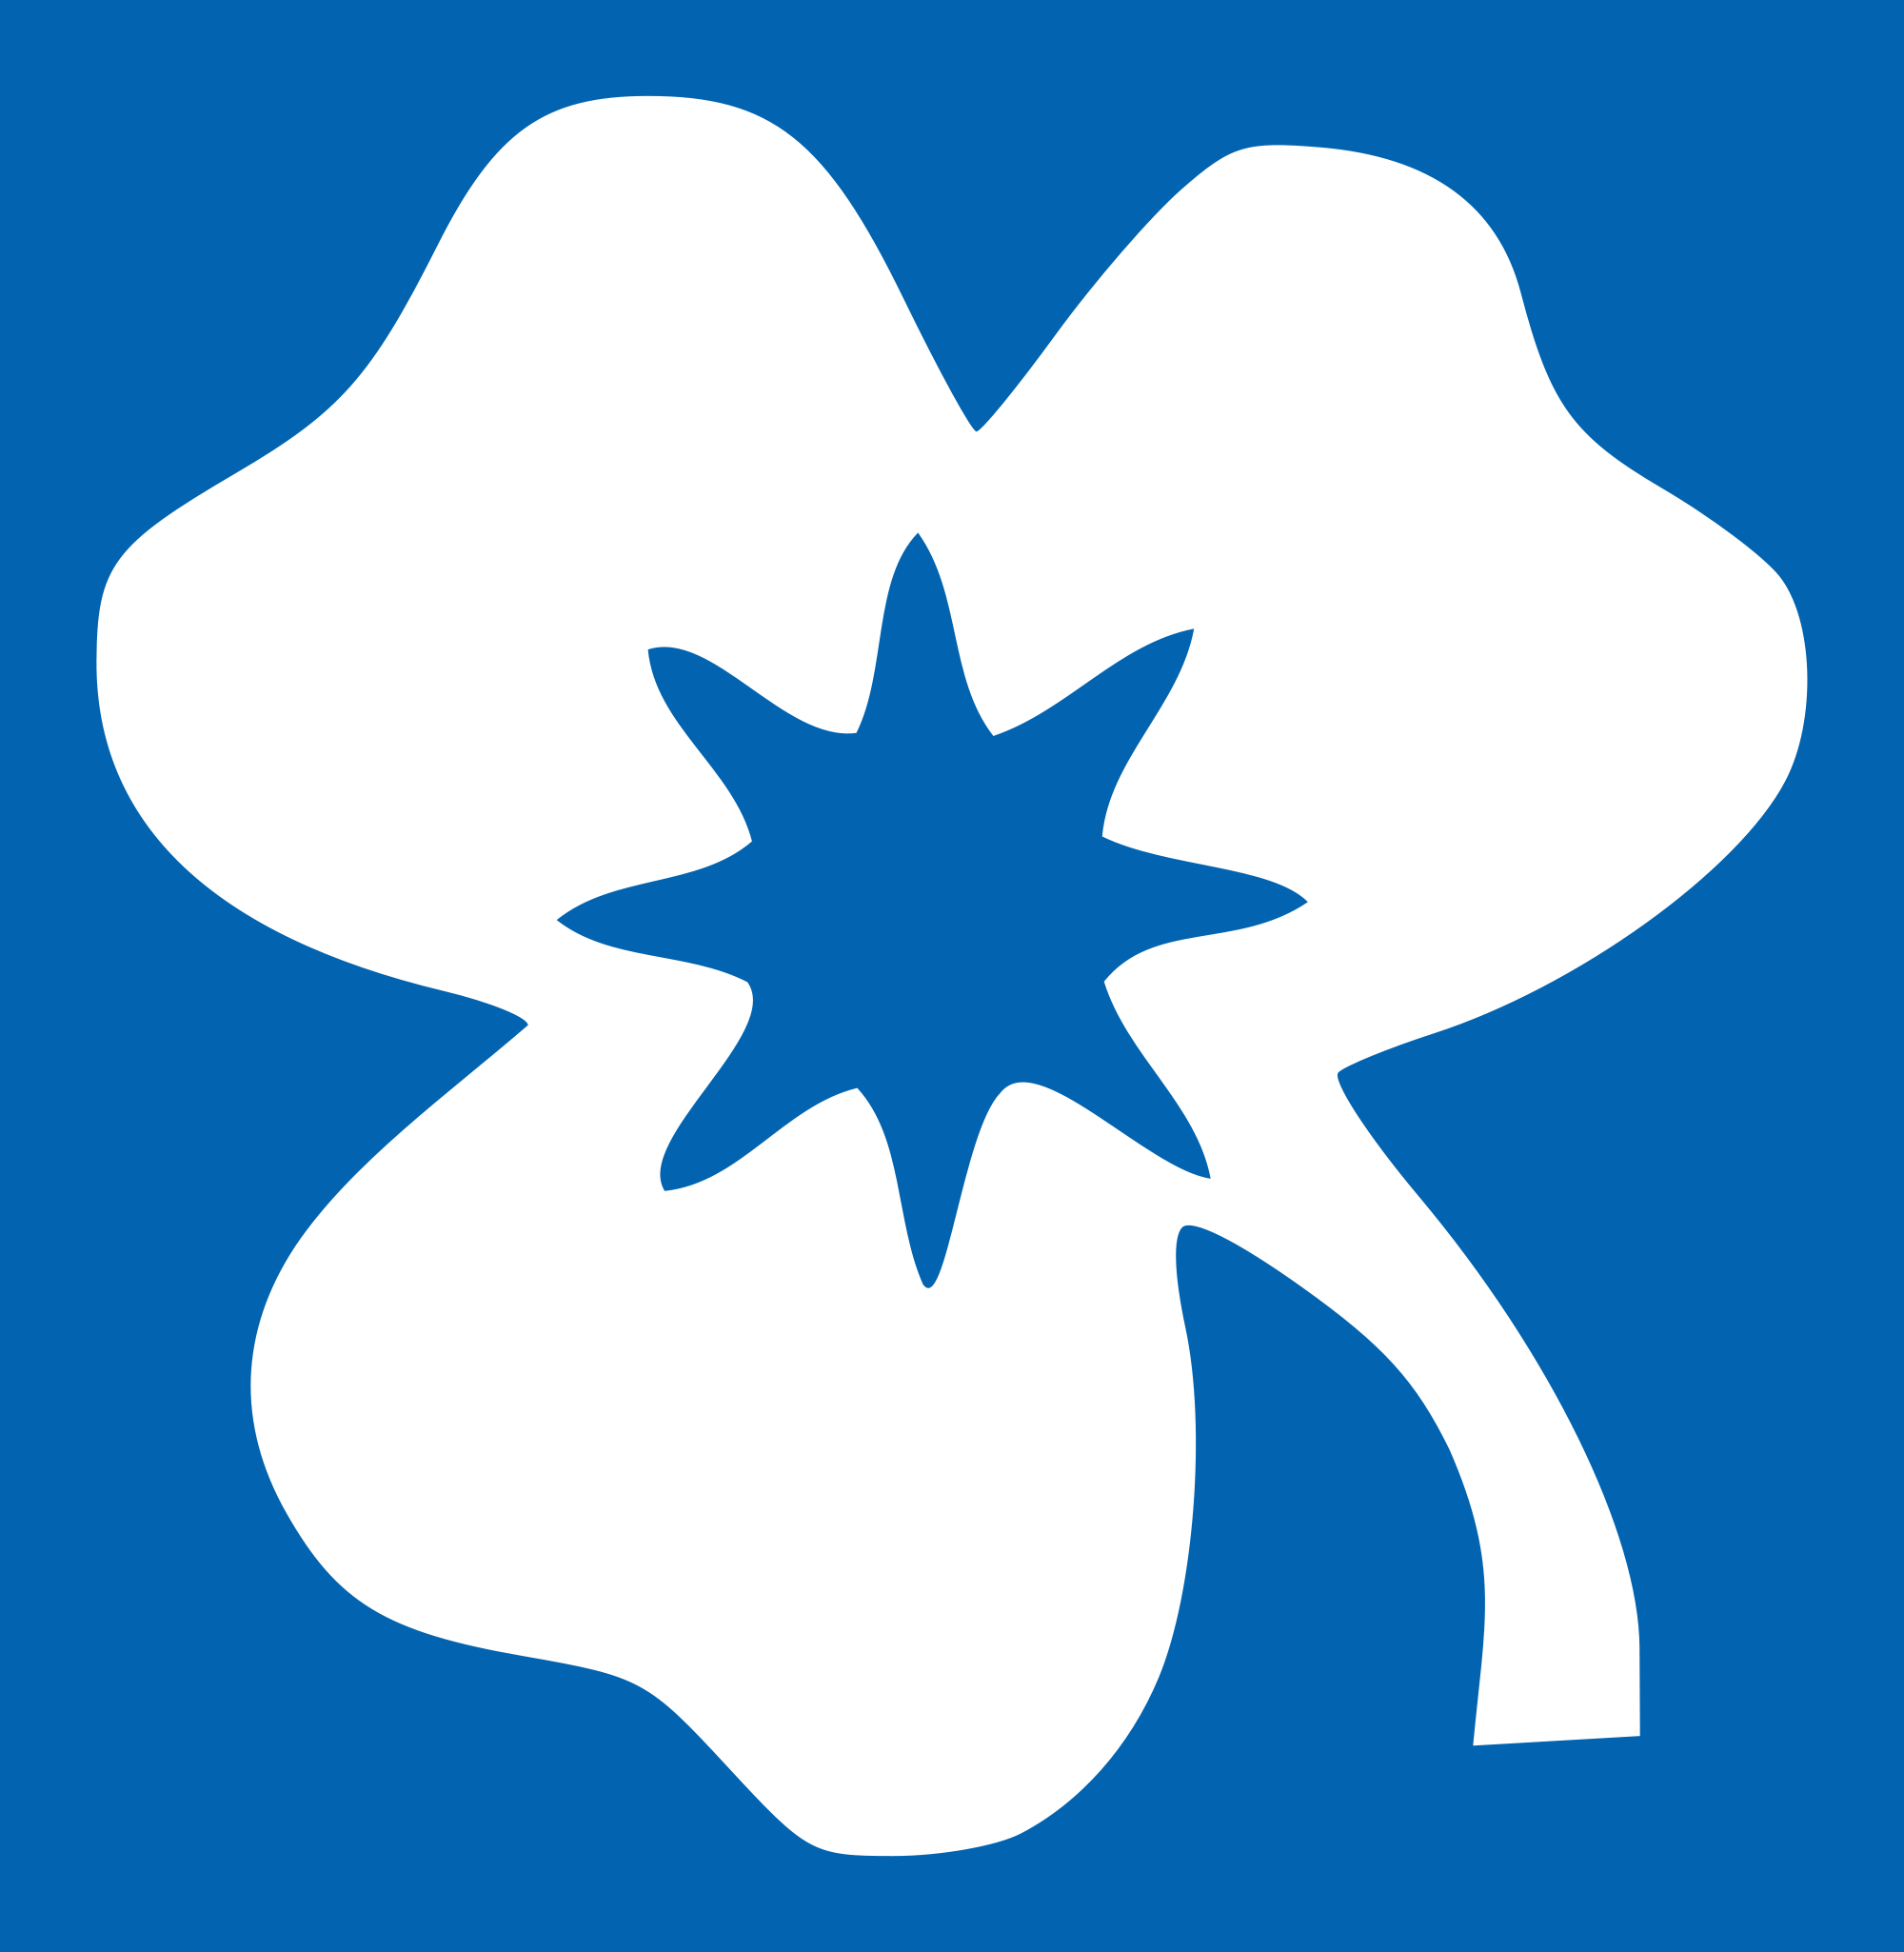 National Association Of Girl Guides And Girl Scouts - National Association Of Girl Guides And Girl Scouts (2000x2050)